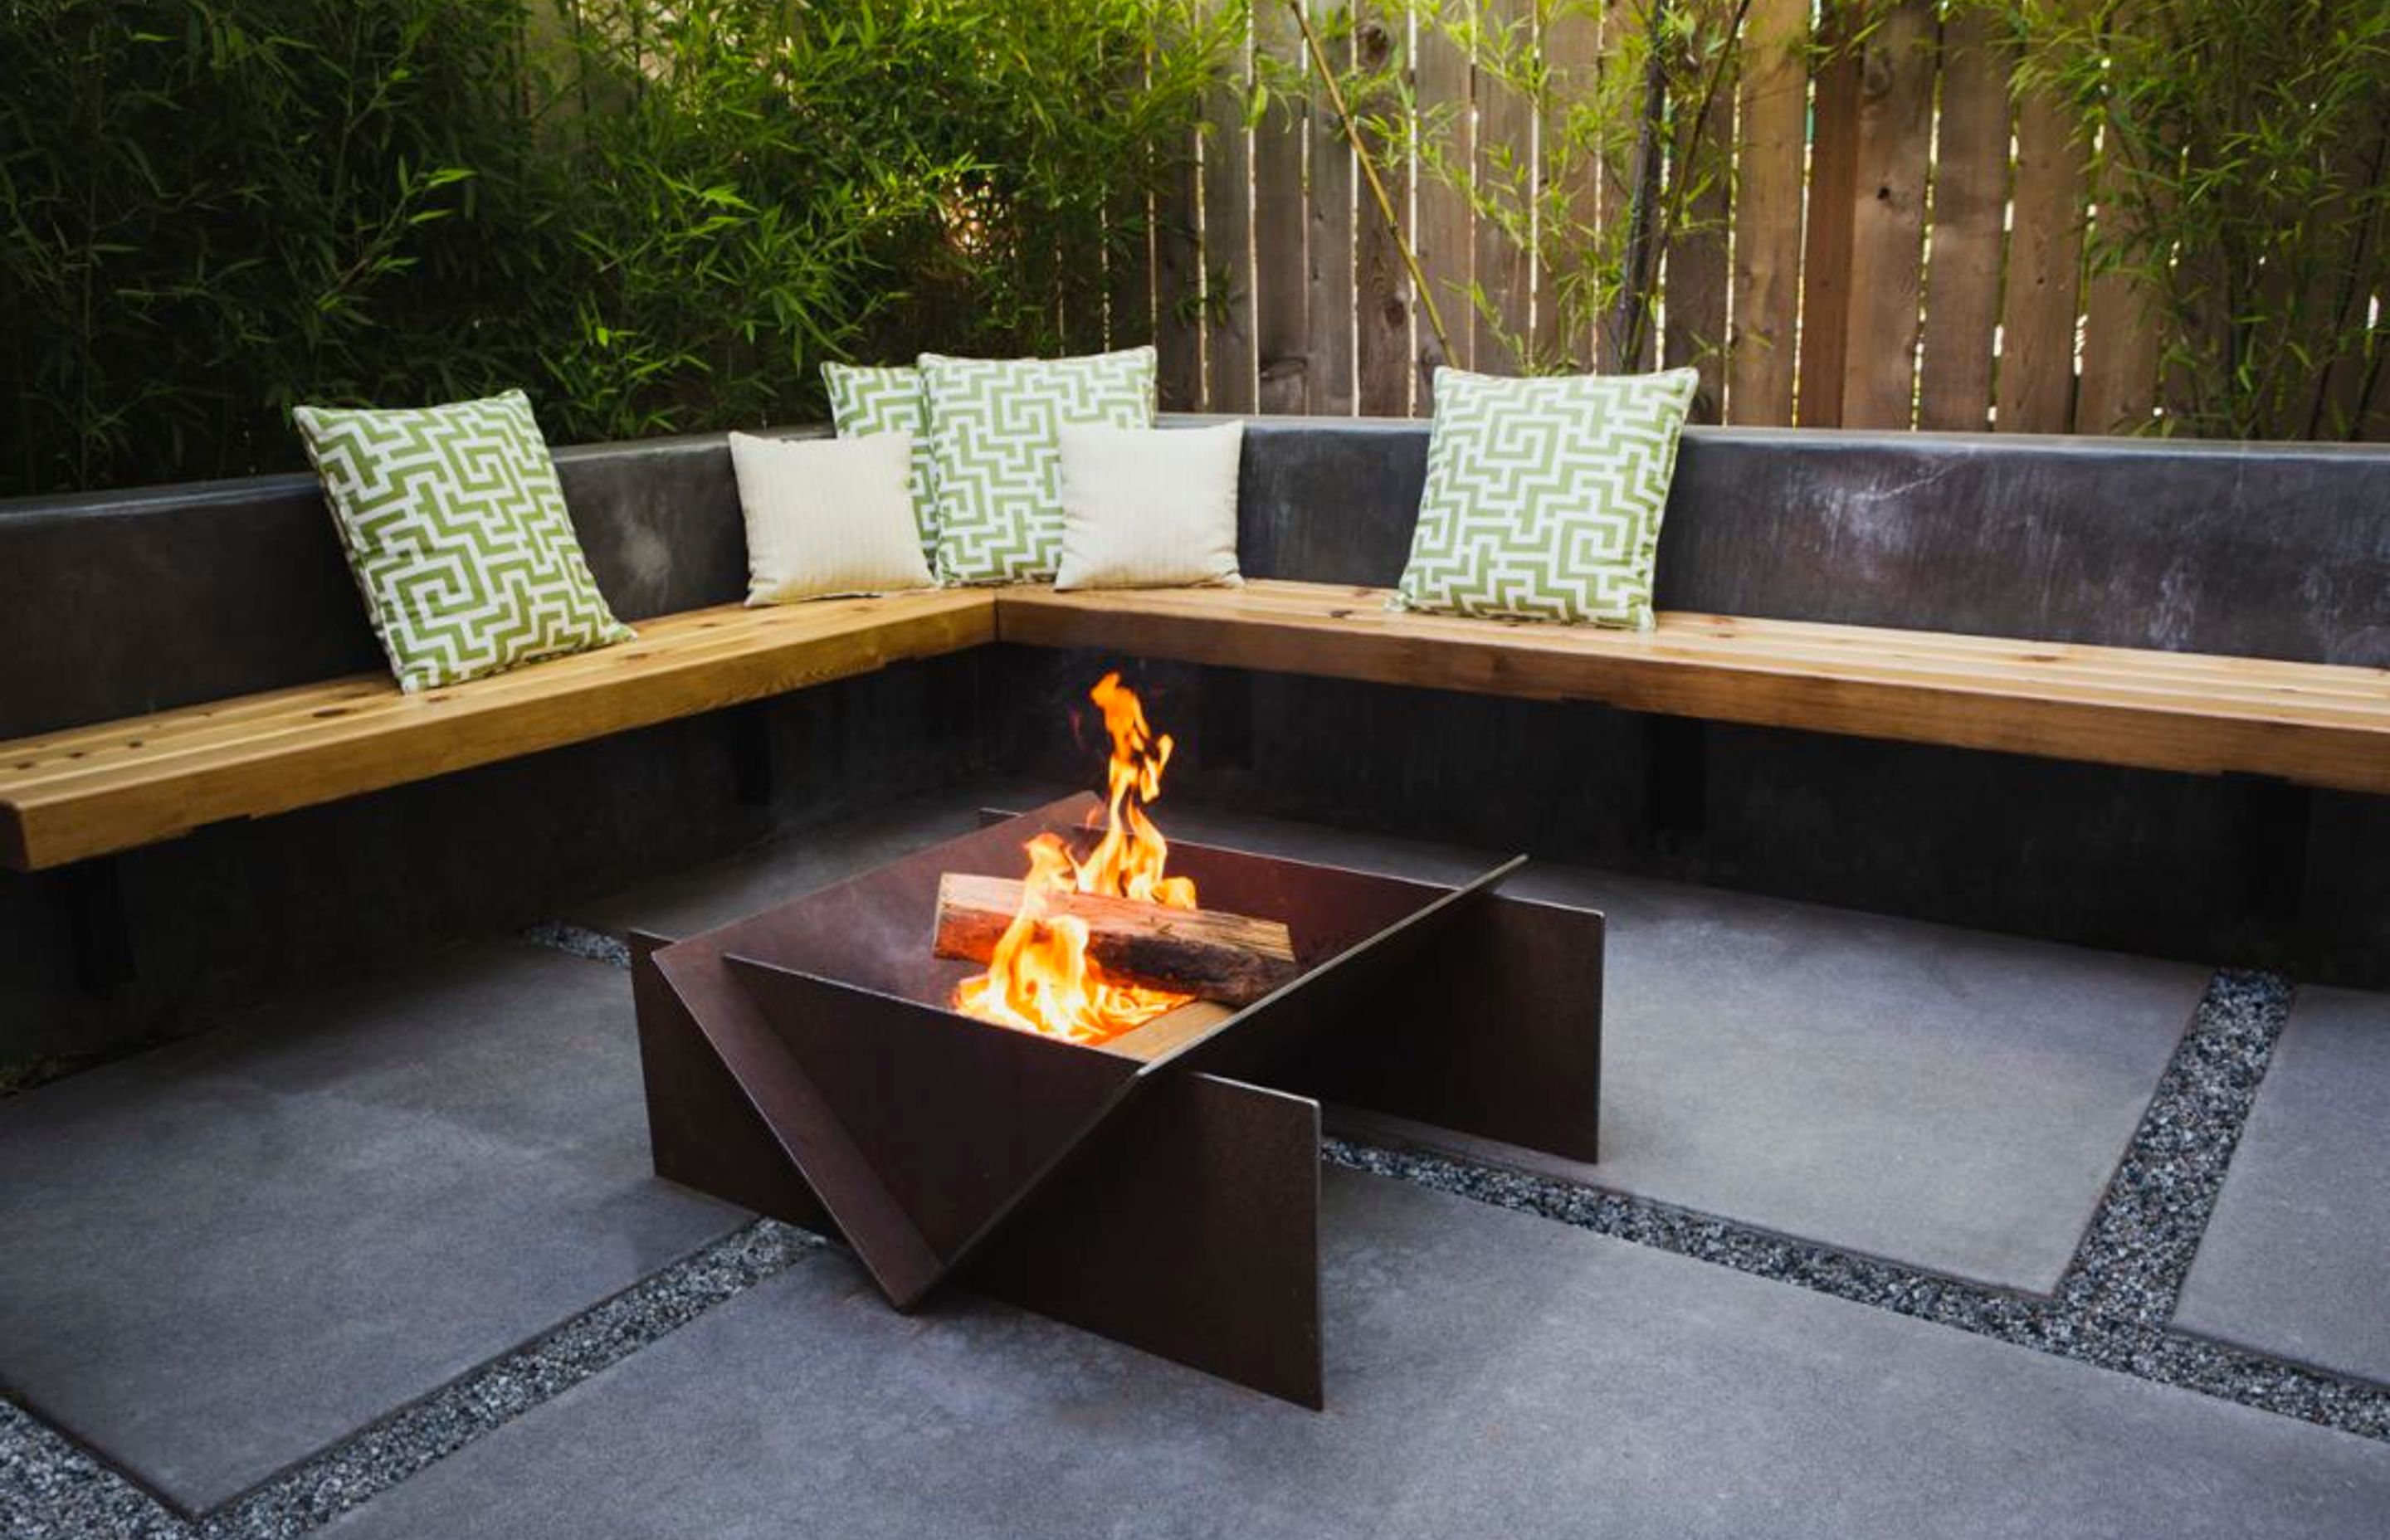 Architectural fire pits are another popular product on offer.